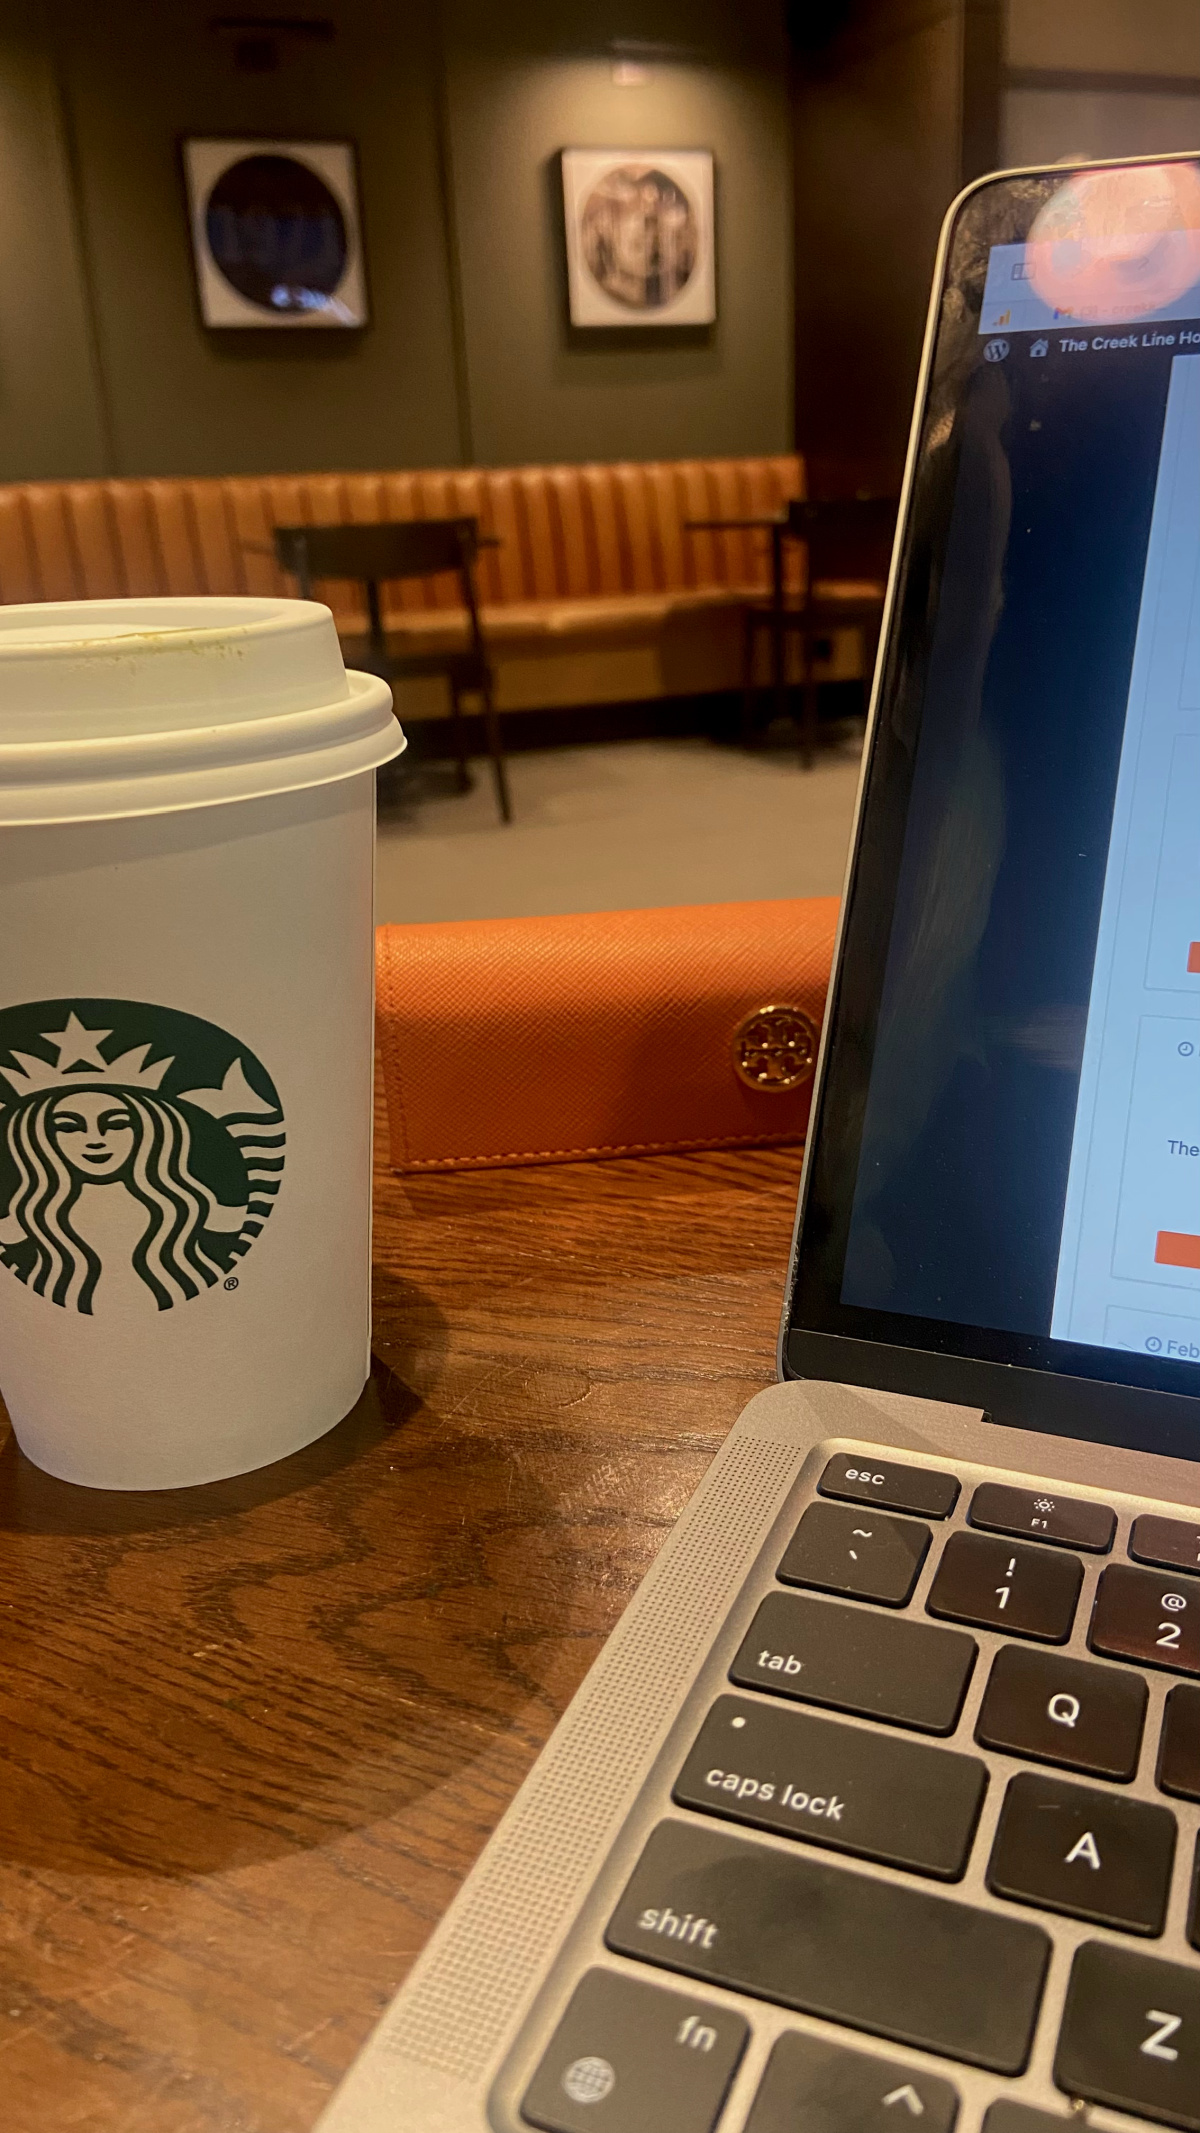 Working in a Starbucks.